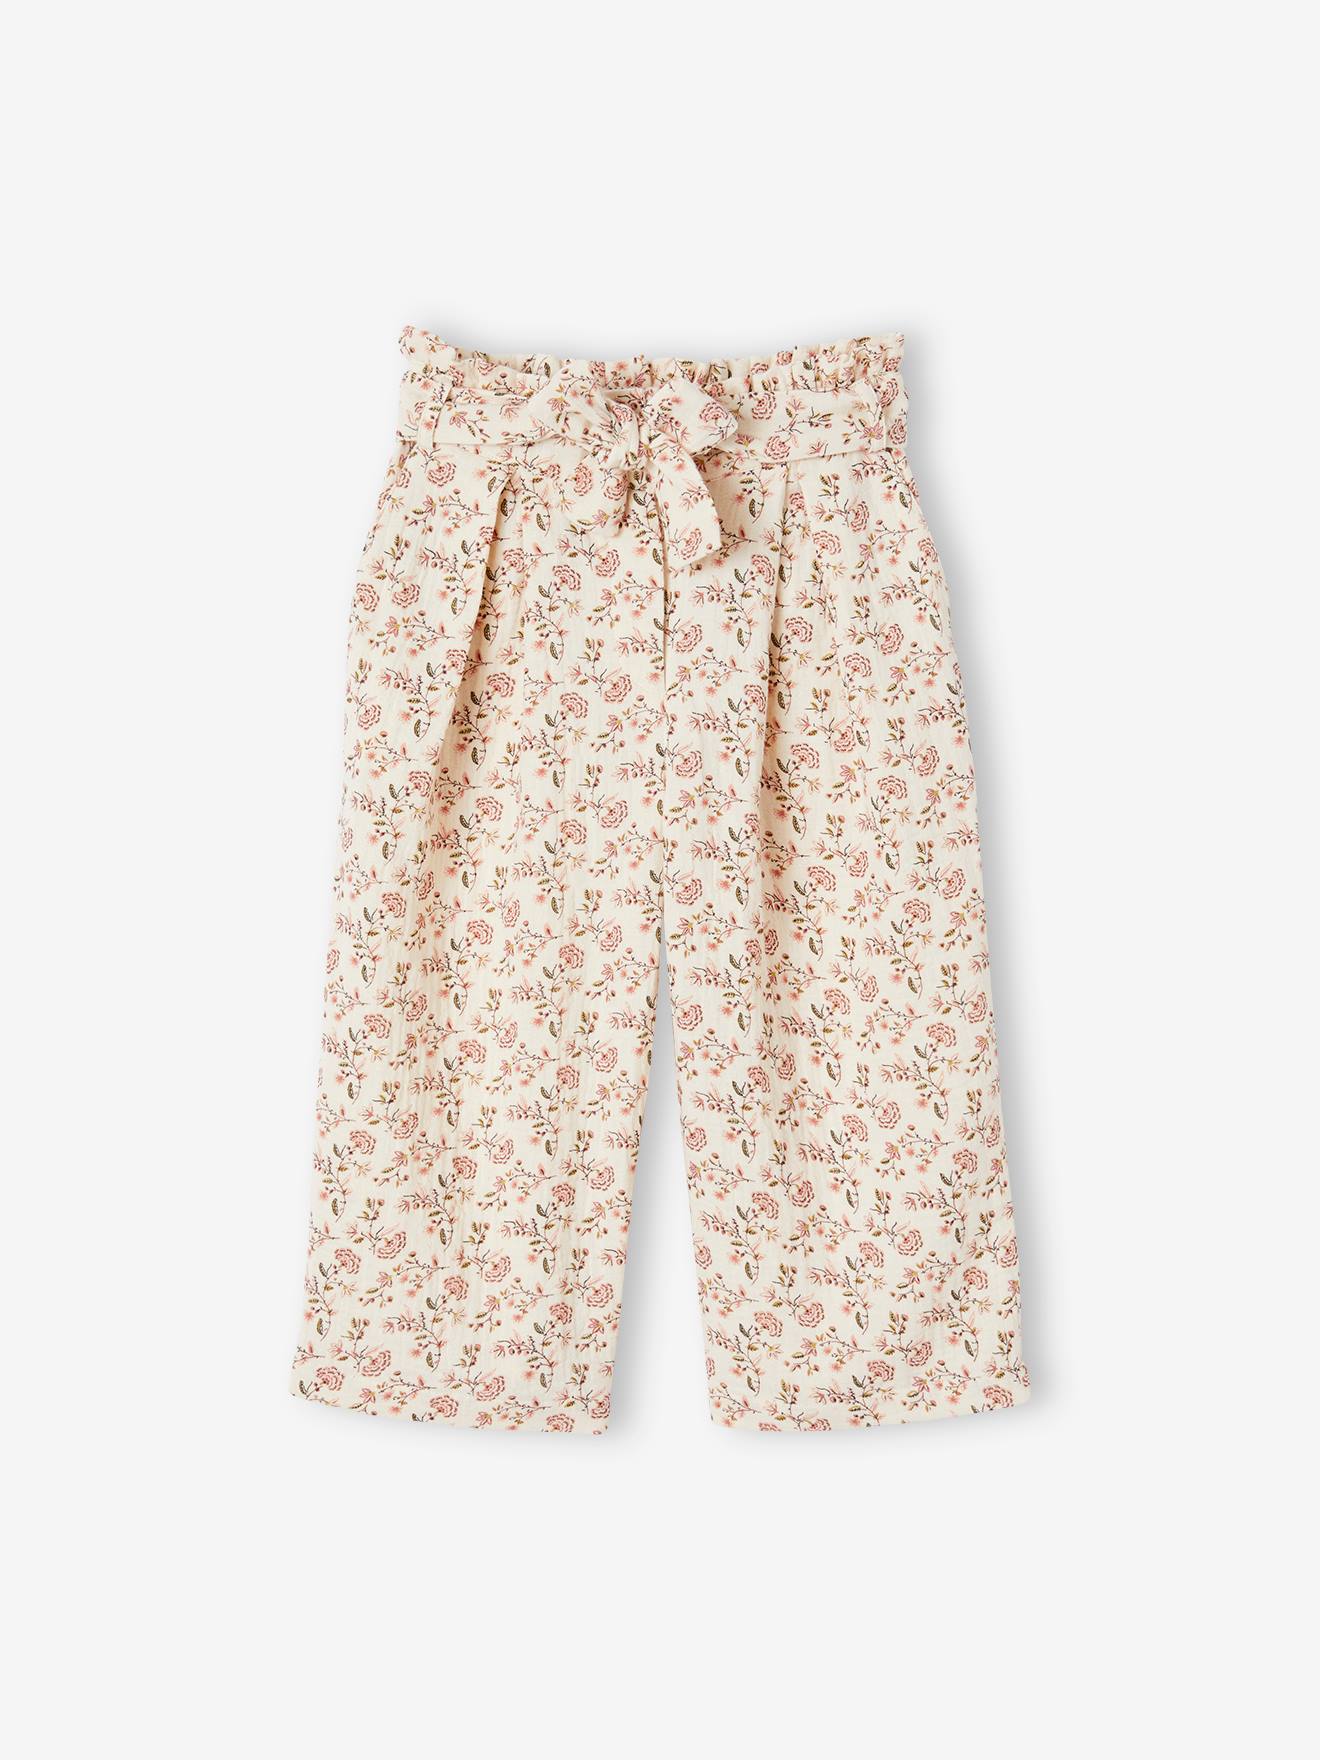 Cropped, Wide Leg Paperbag Trousers in Cotton Gauze for Girls ecru